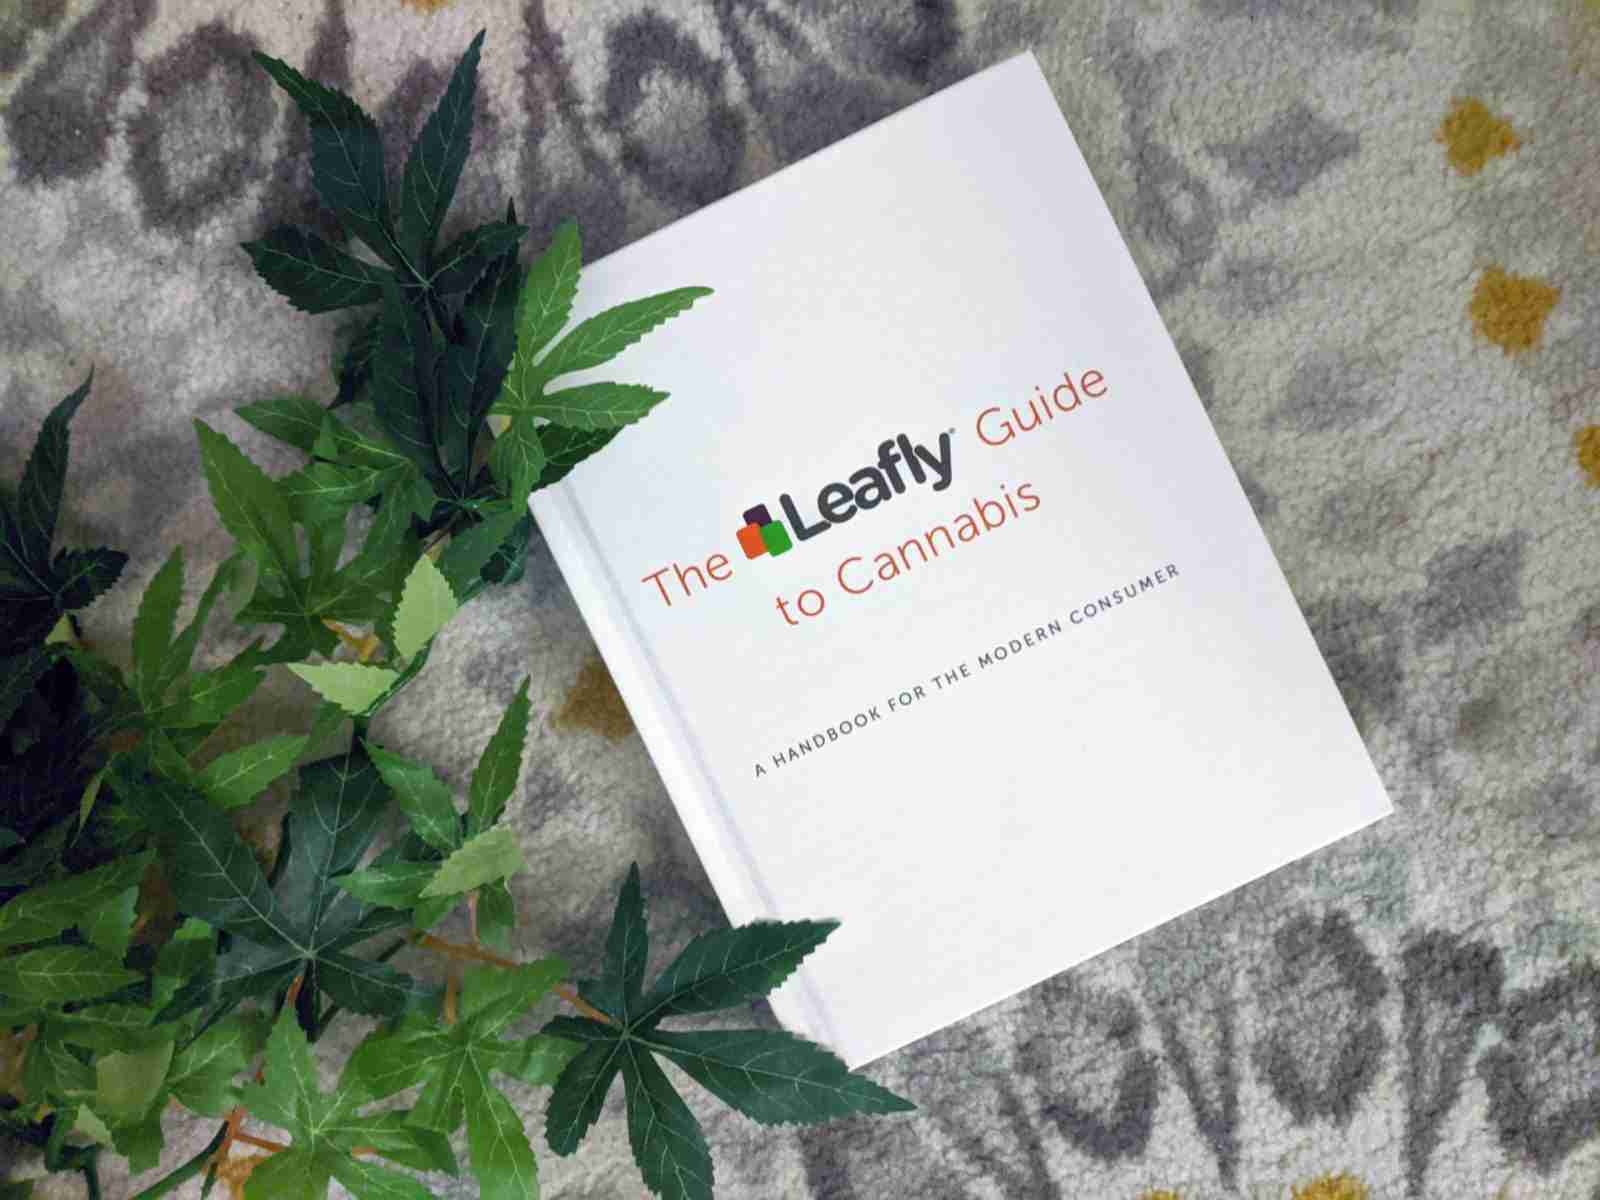 Leafly Guide to Cannabis